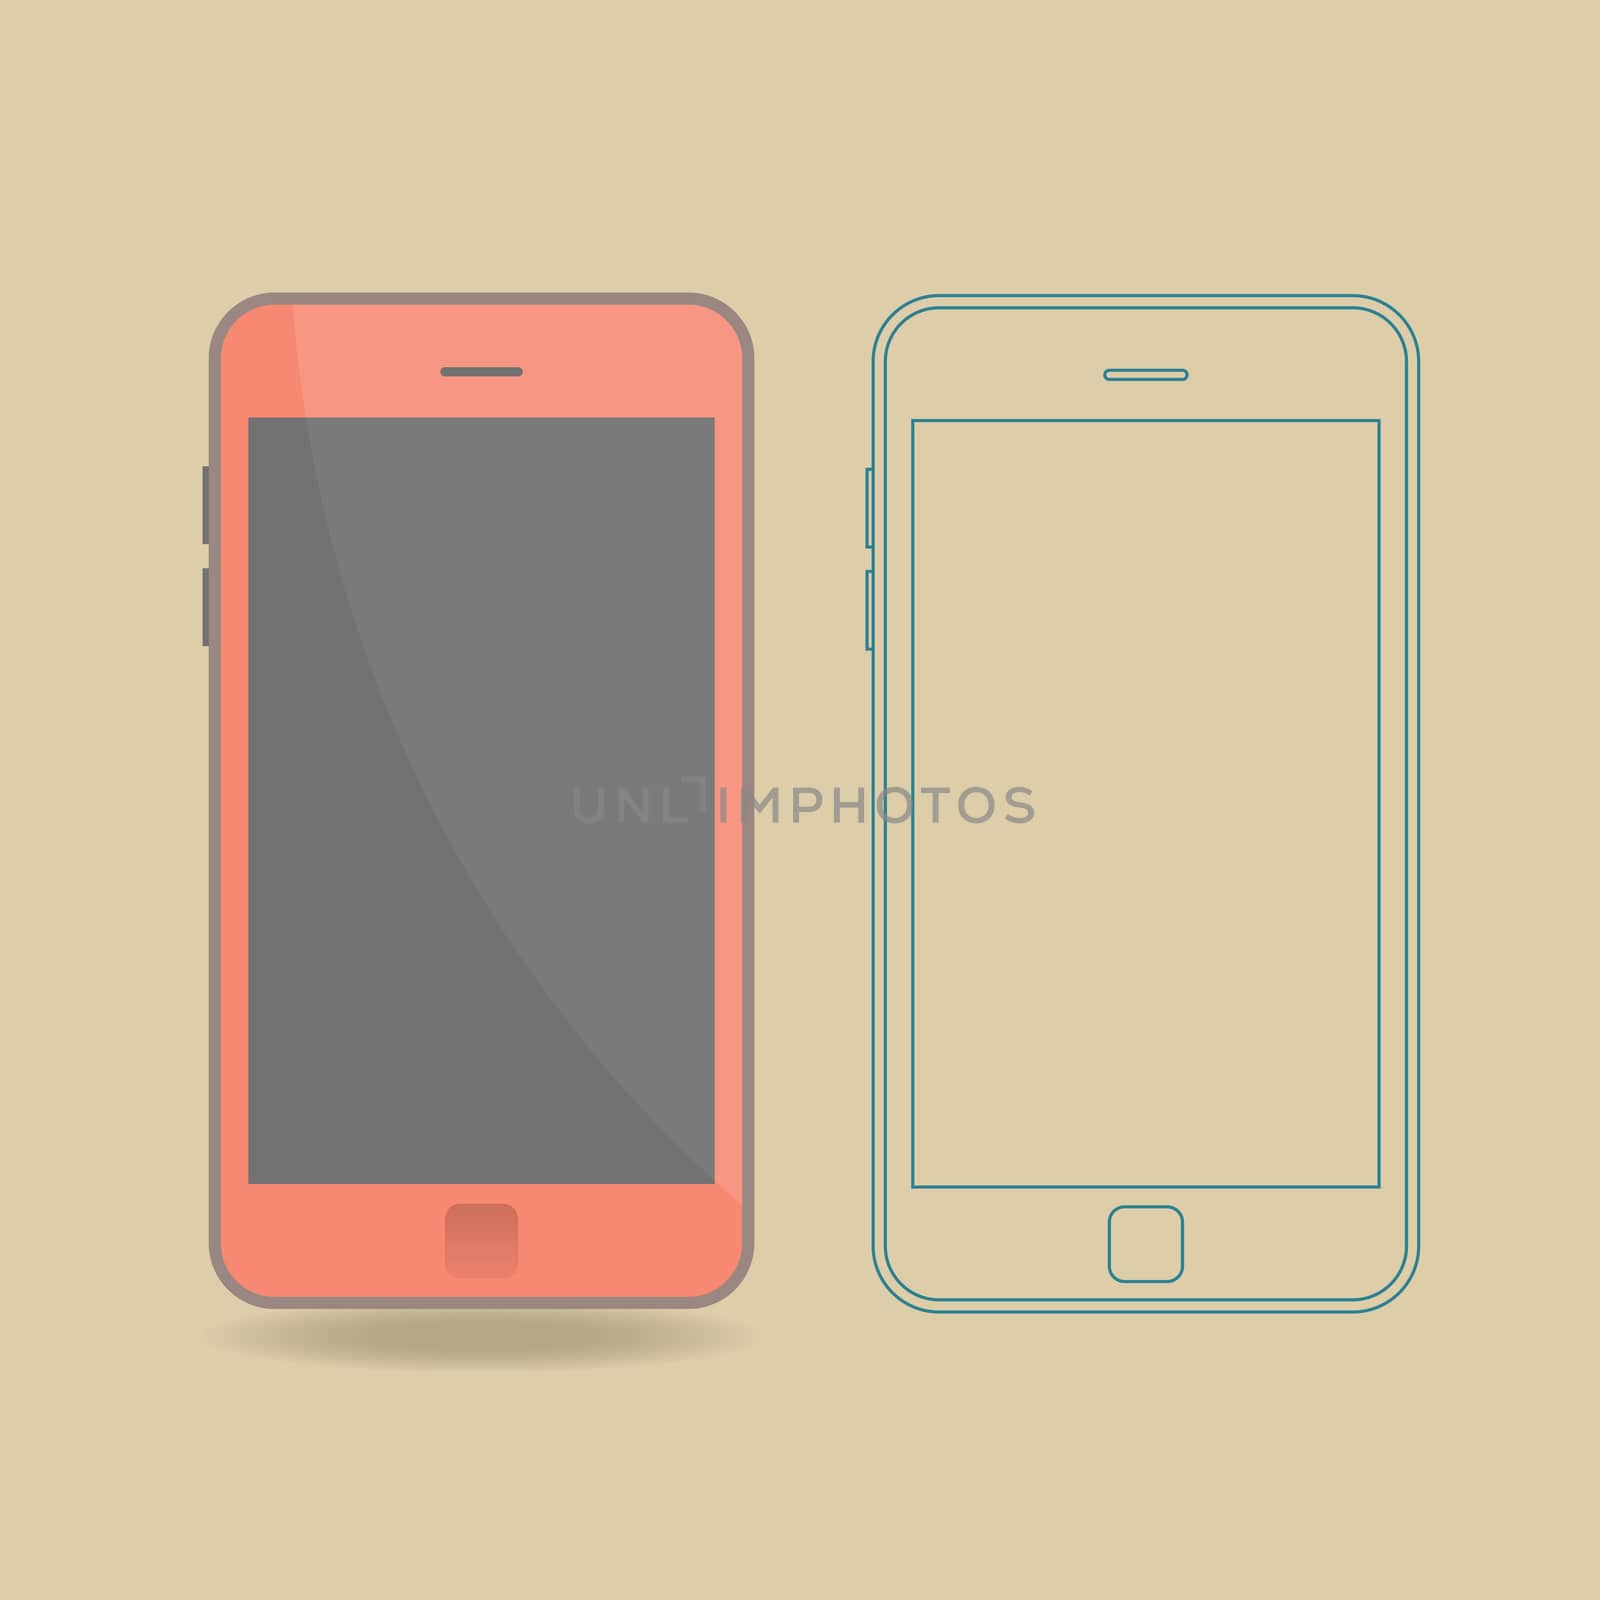 Flat Mobile Phones by Elena_Garder